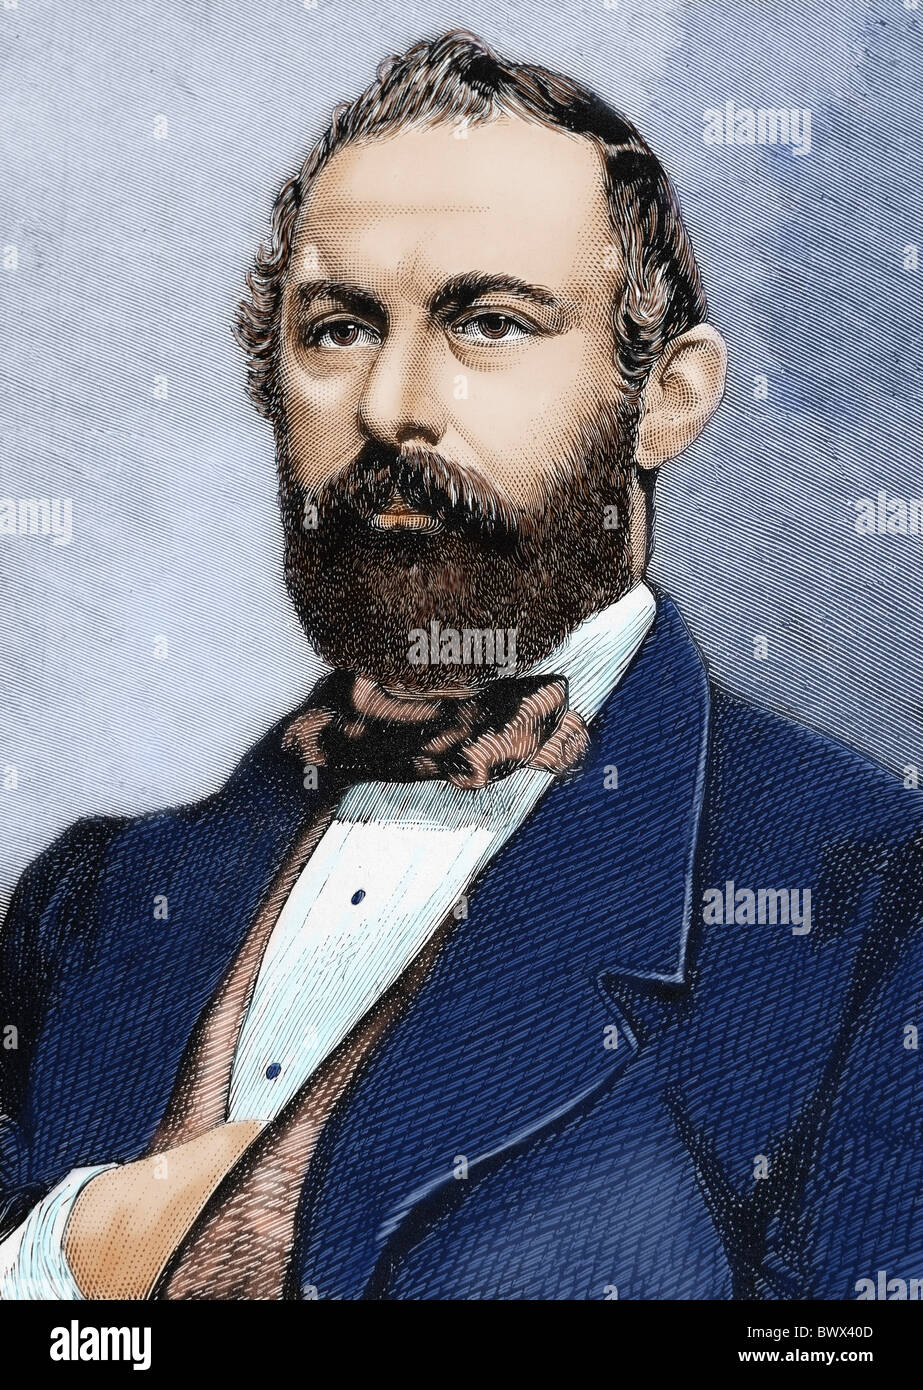 Charles XV (1826-1872). King of Sweden and Norway (1859-1872). Colored engraving. Stock Photo